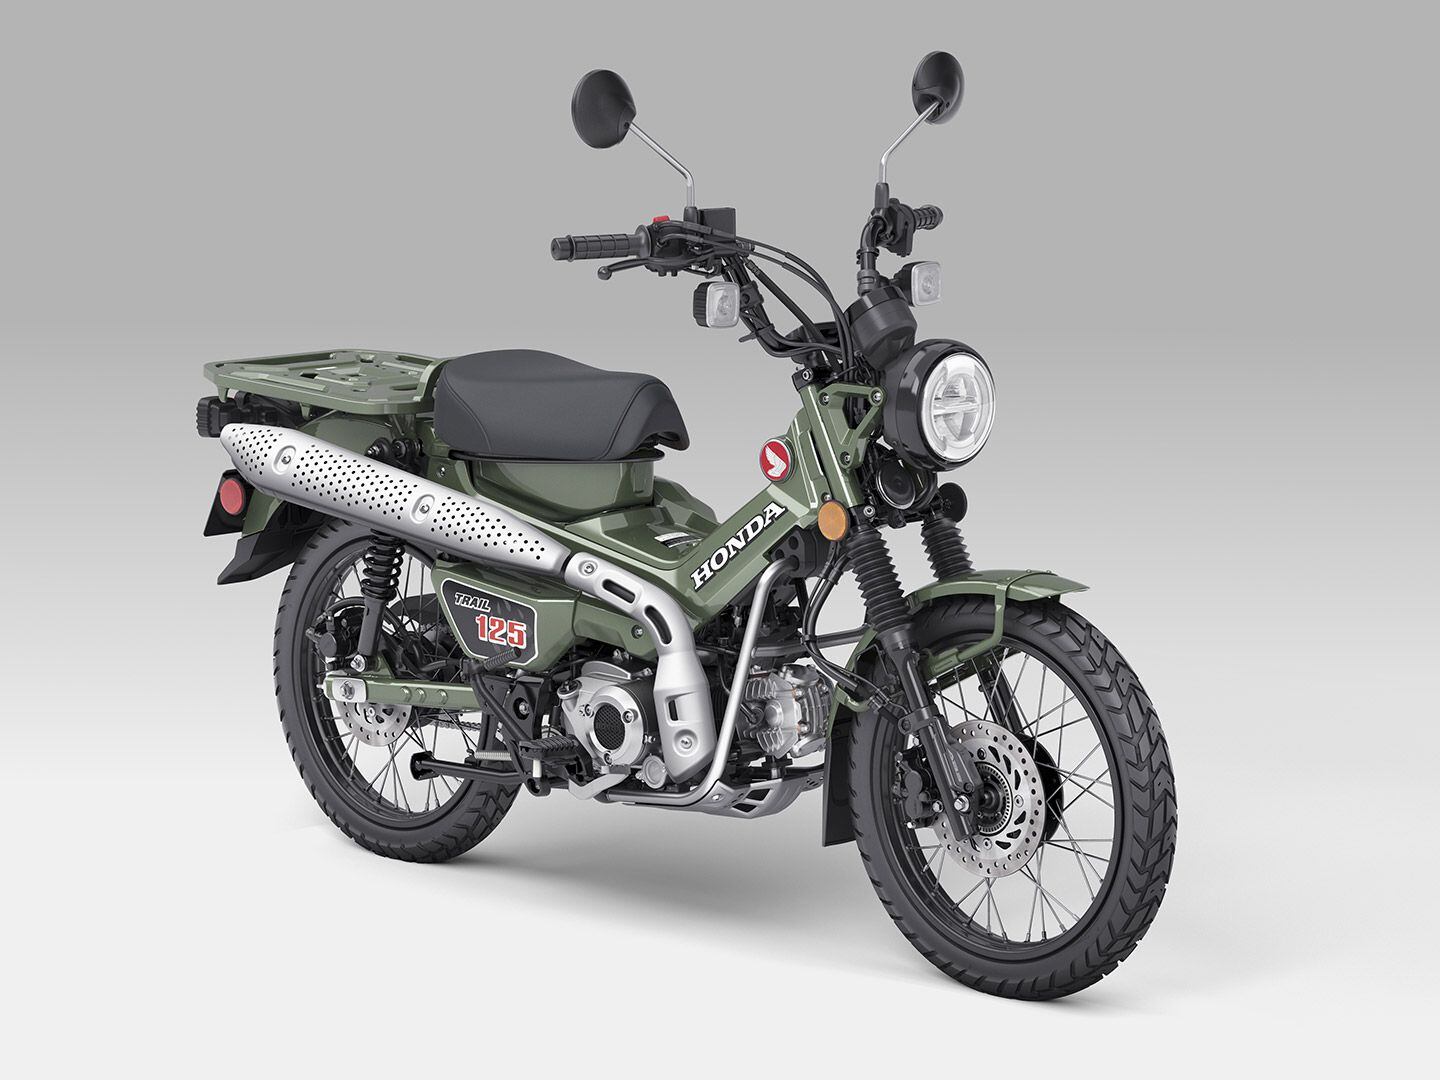 The Trail125 is the rugged cousin to Honda’s legendary Super Cub, with just enough off-road chops for urban adventure and casual off-road exploring.